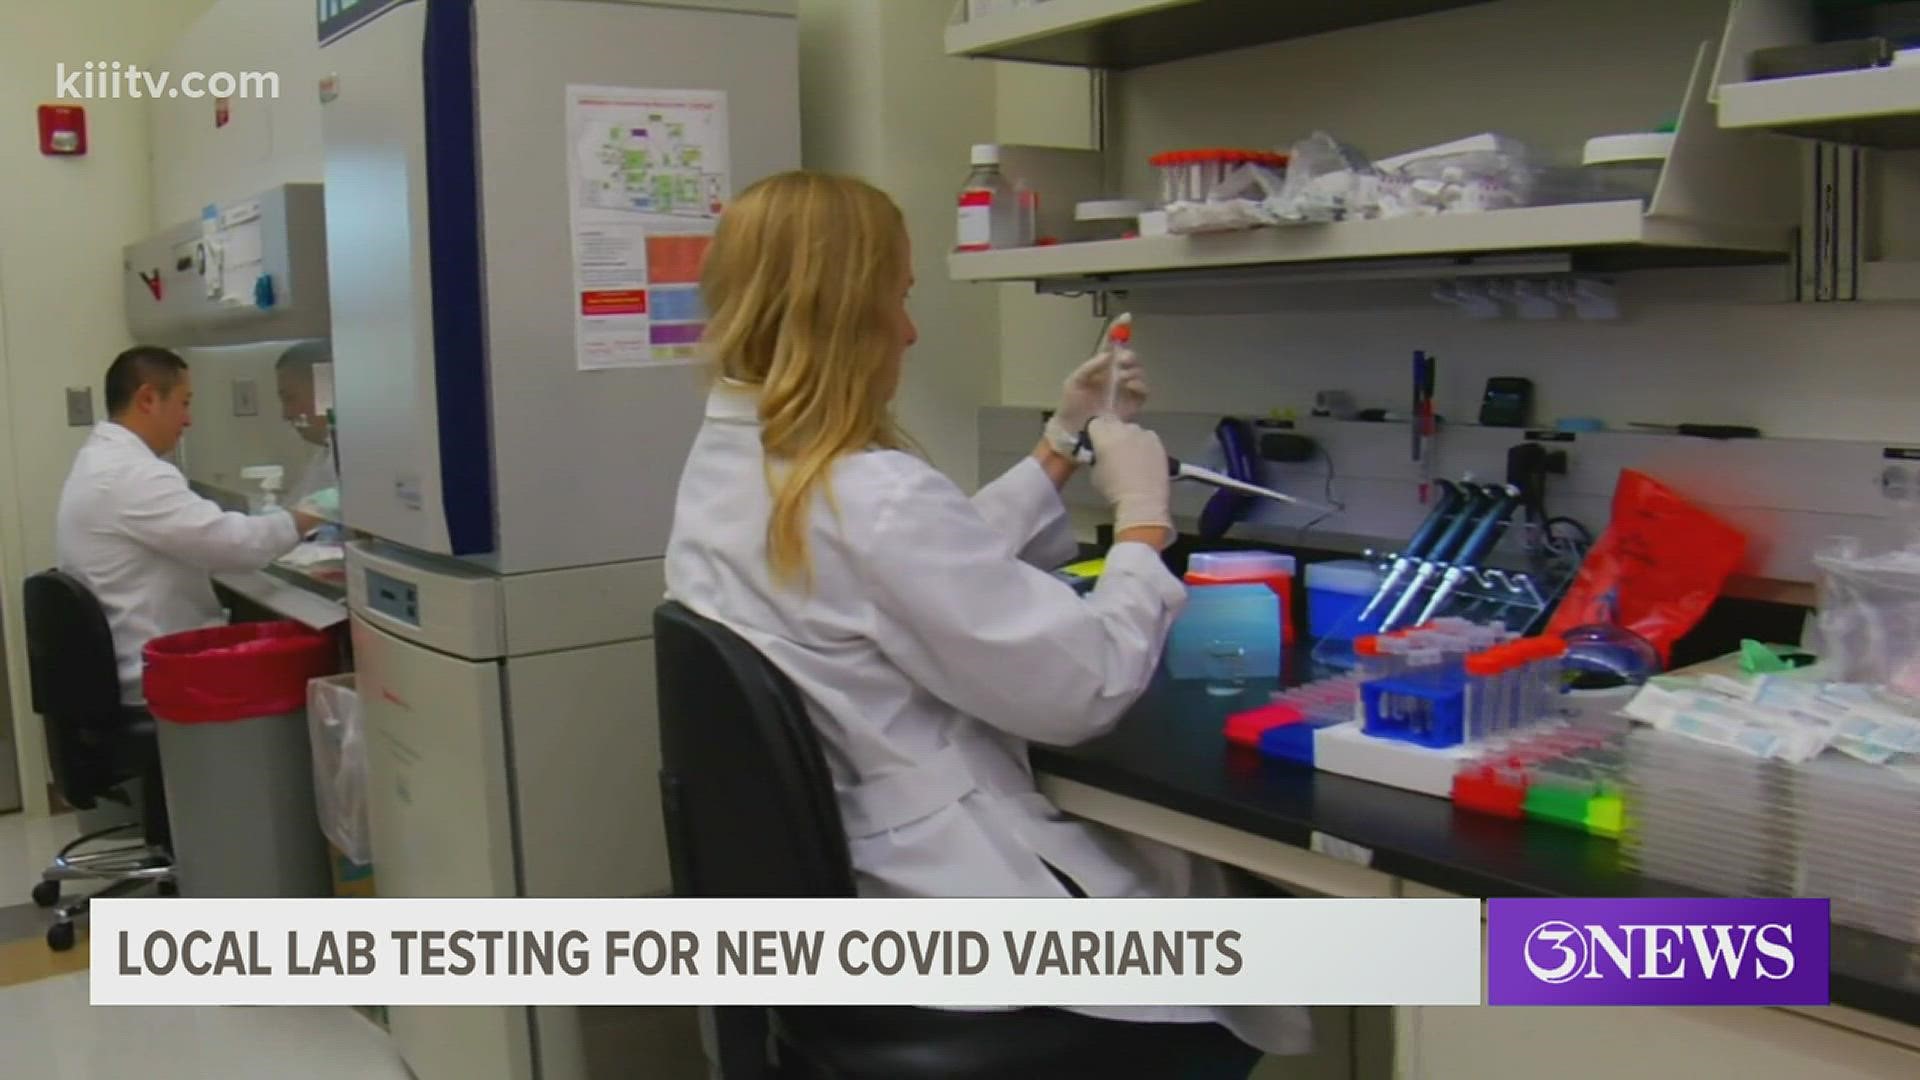 According to Dr. Phillips another patient came in complaining of COVID-19 symptoms, but his test results didn’t make any sense compared with what they had ever seen.